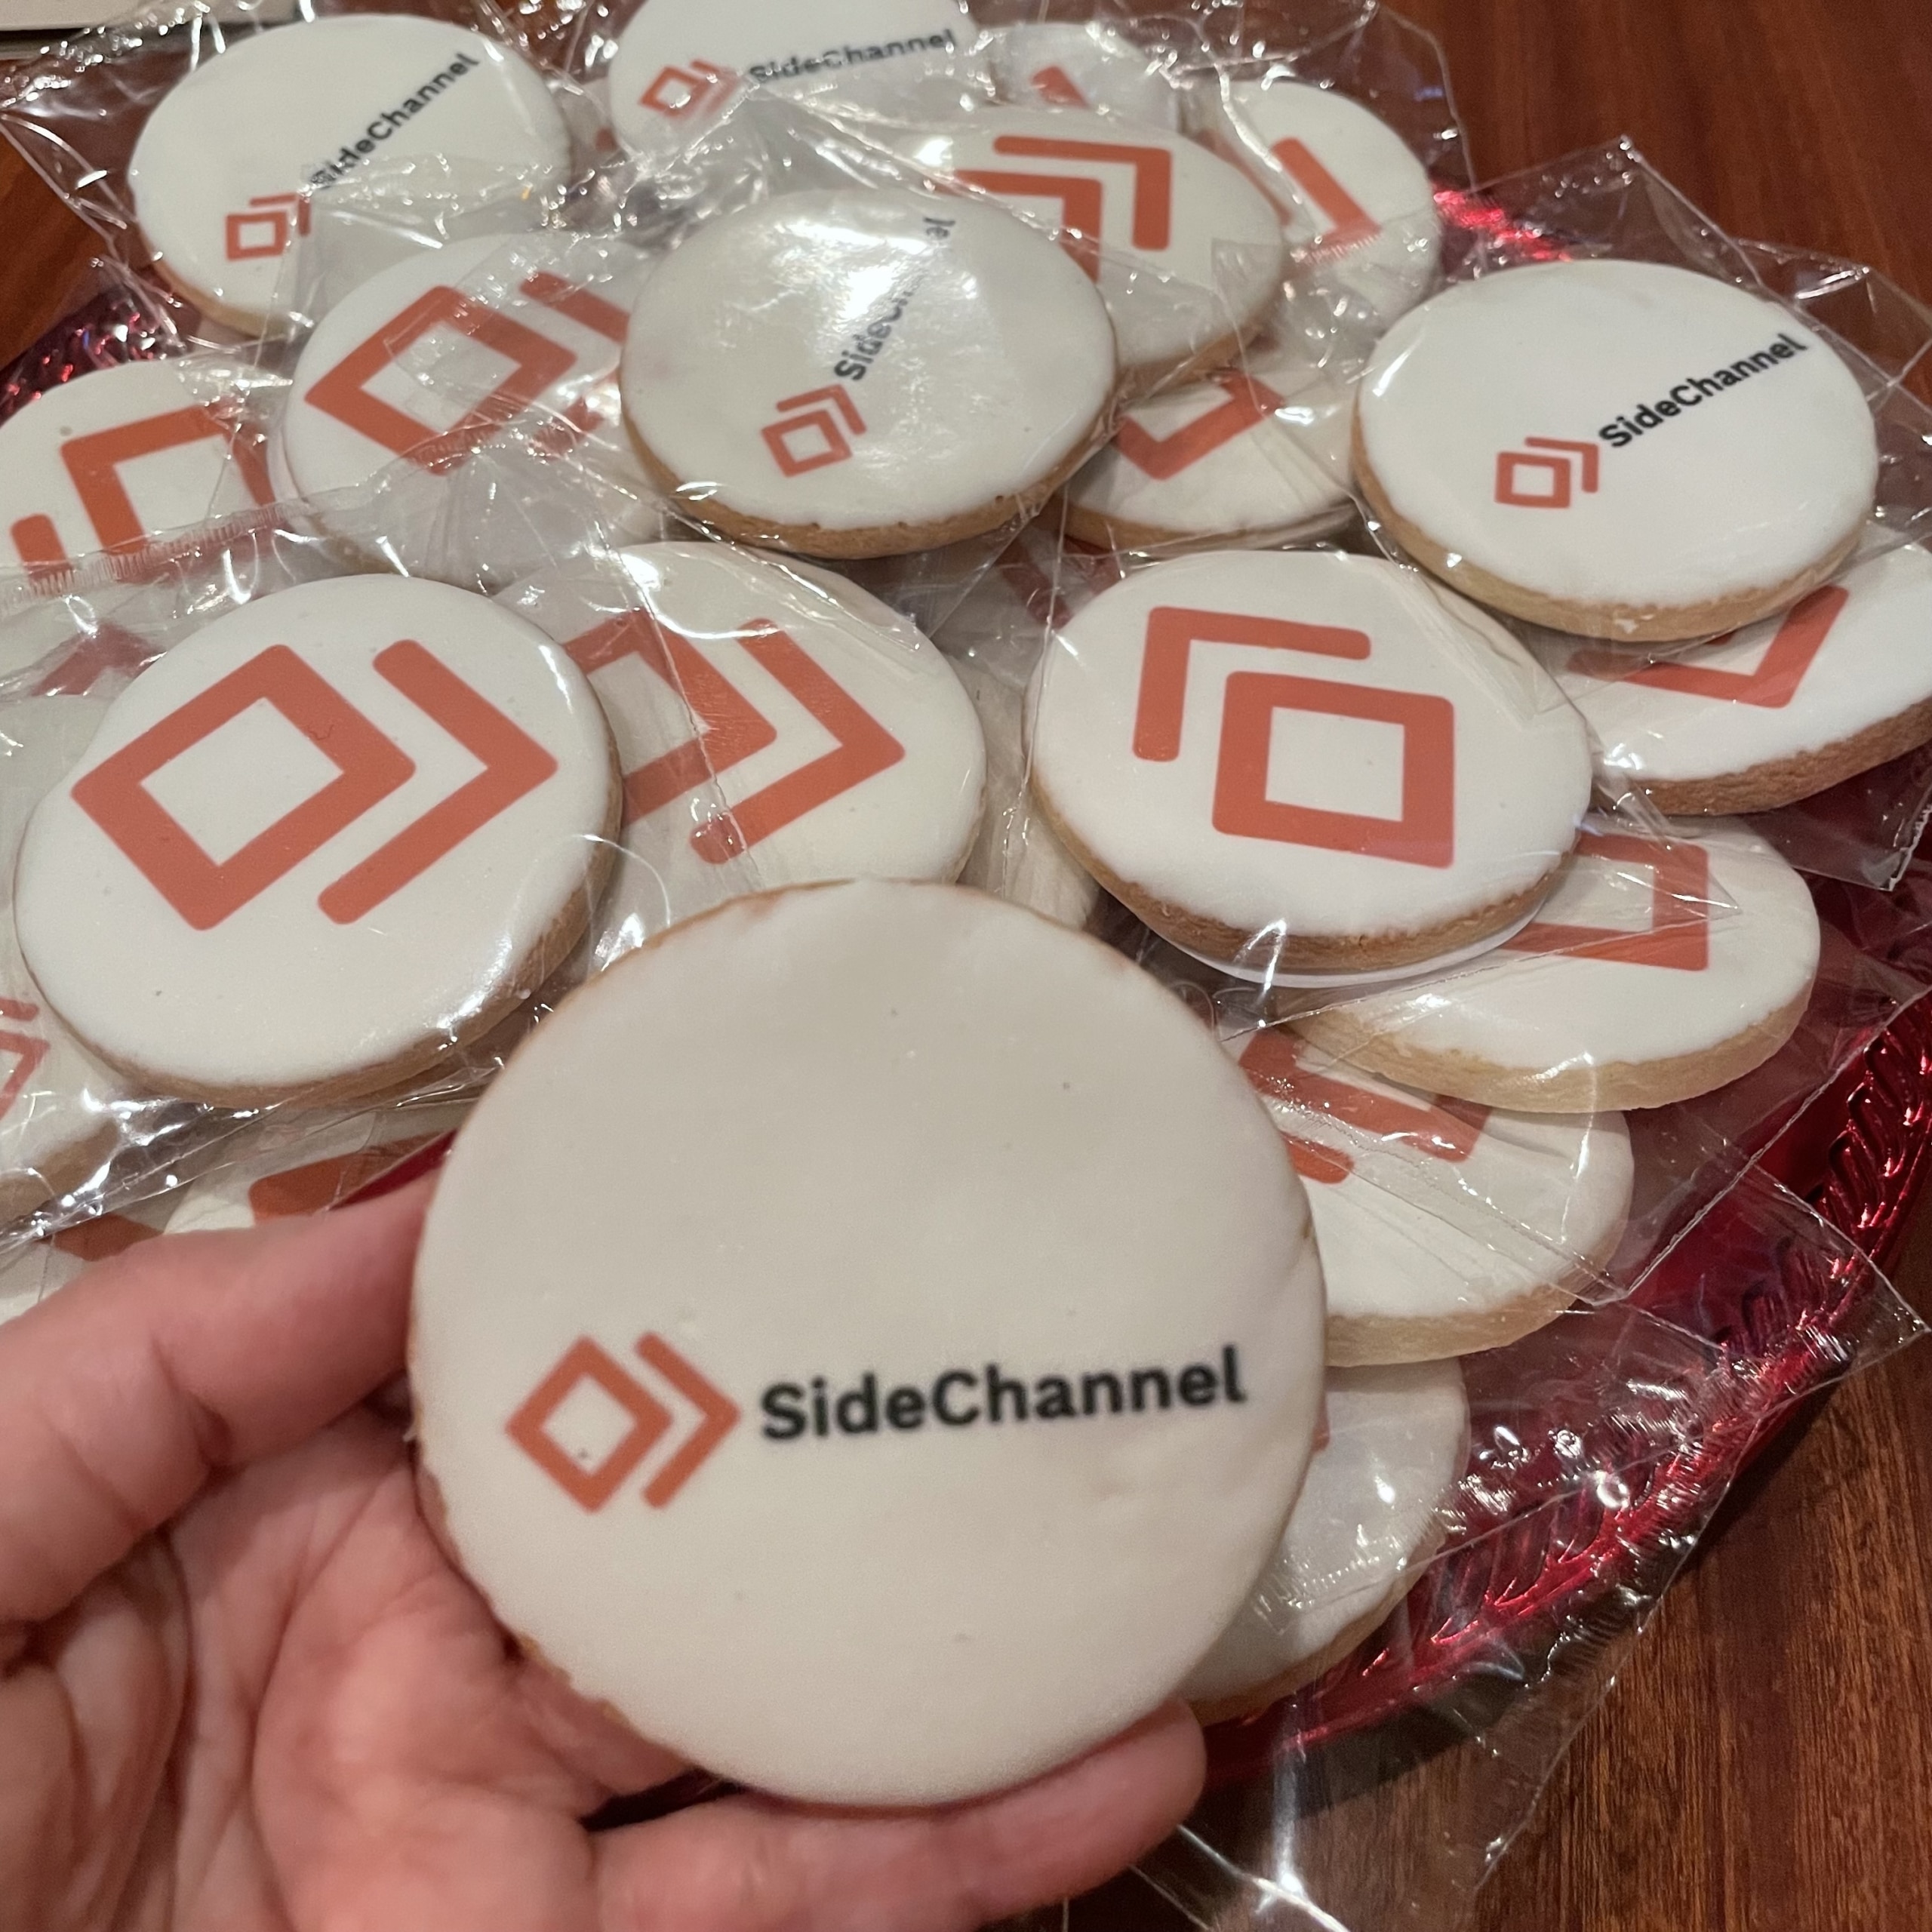 White sugar cookies feature red SideChannel logo